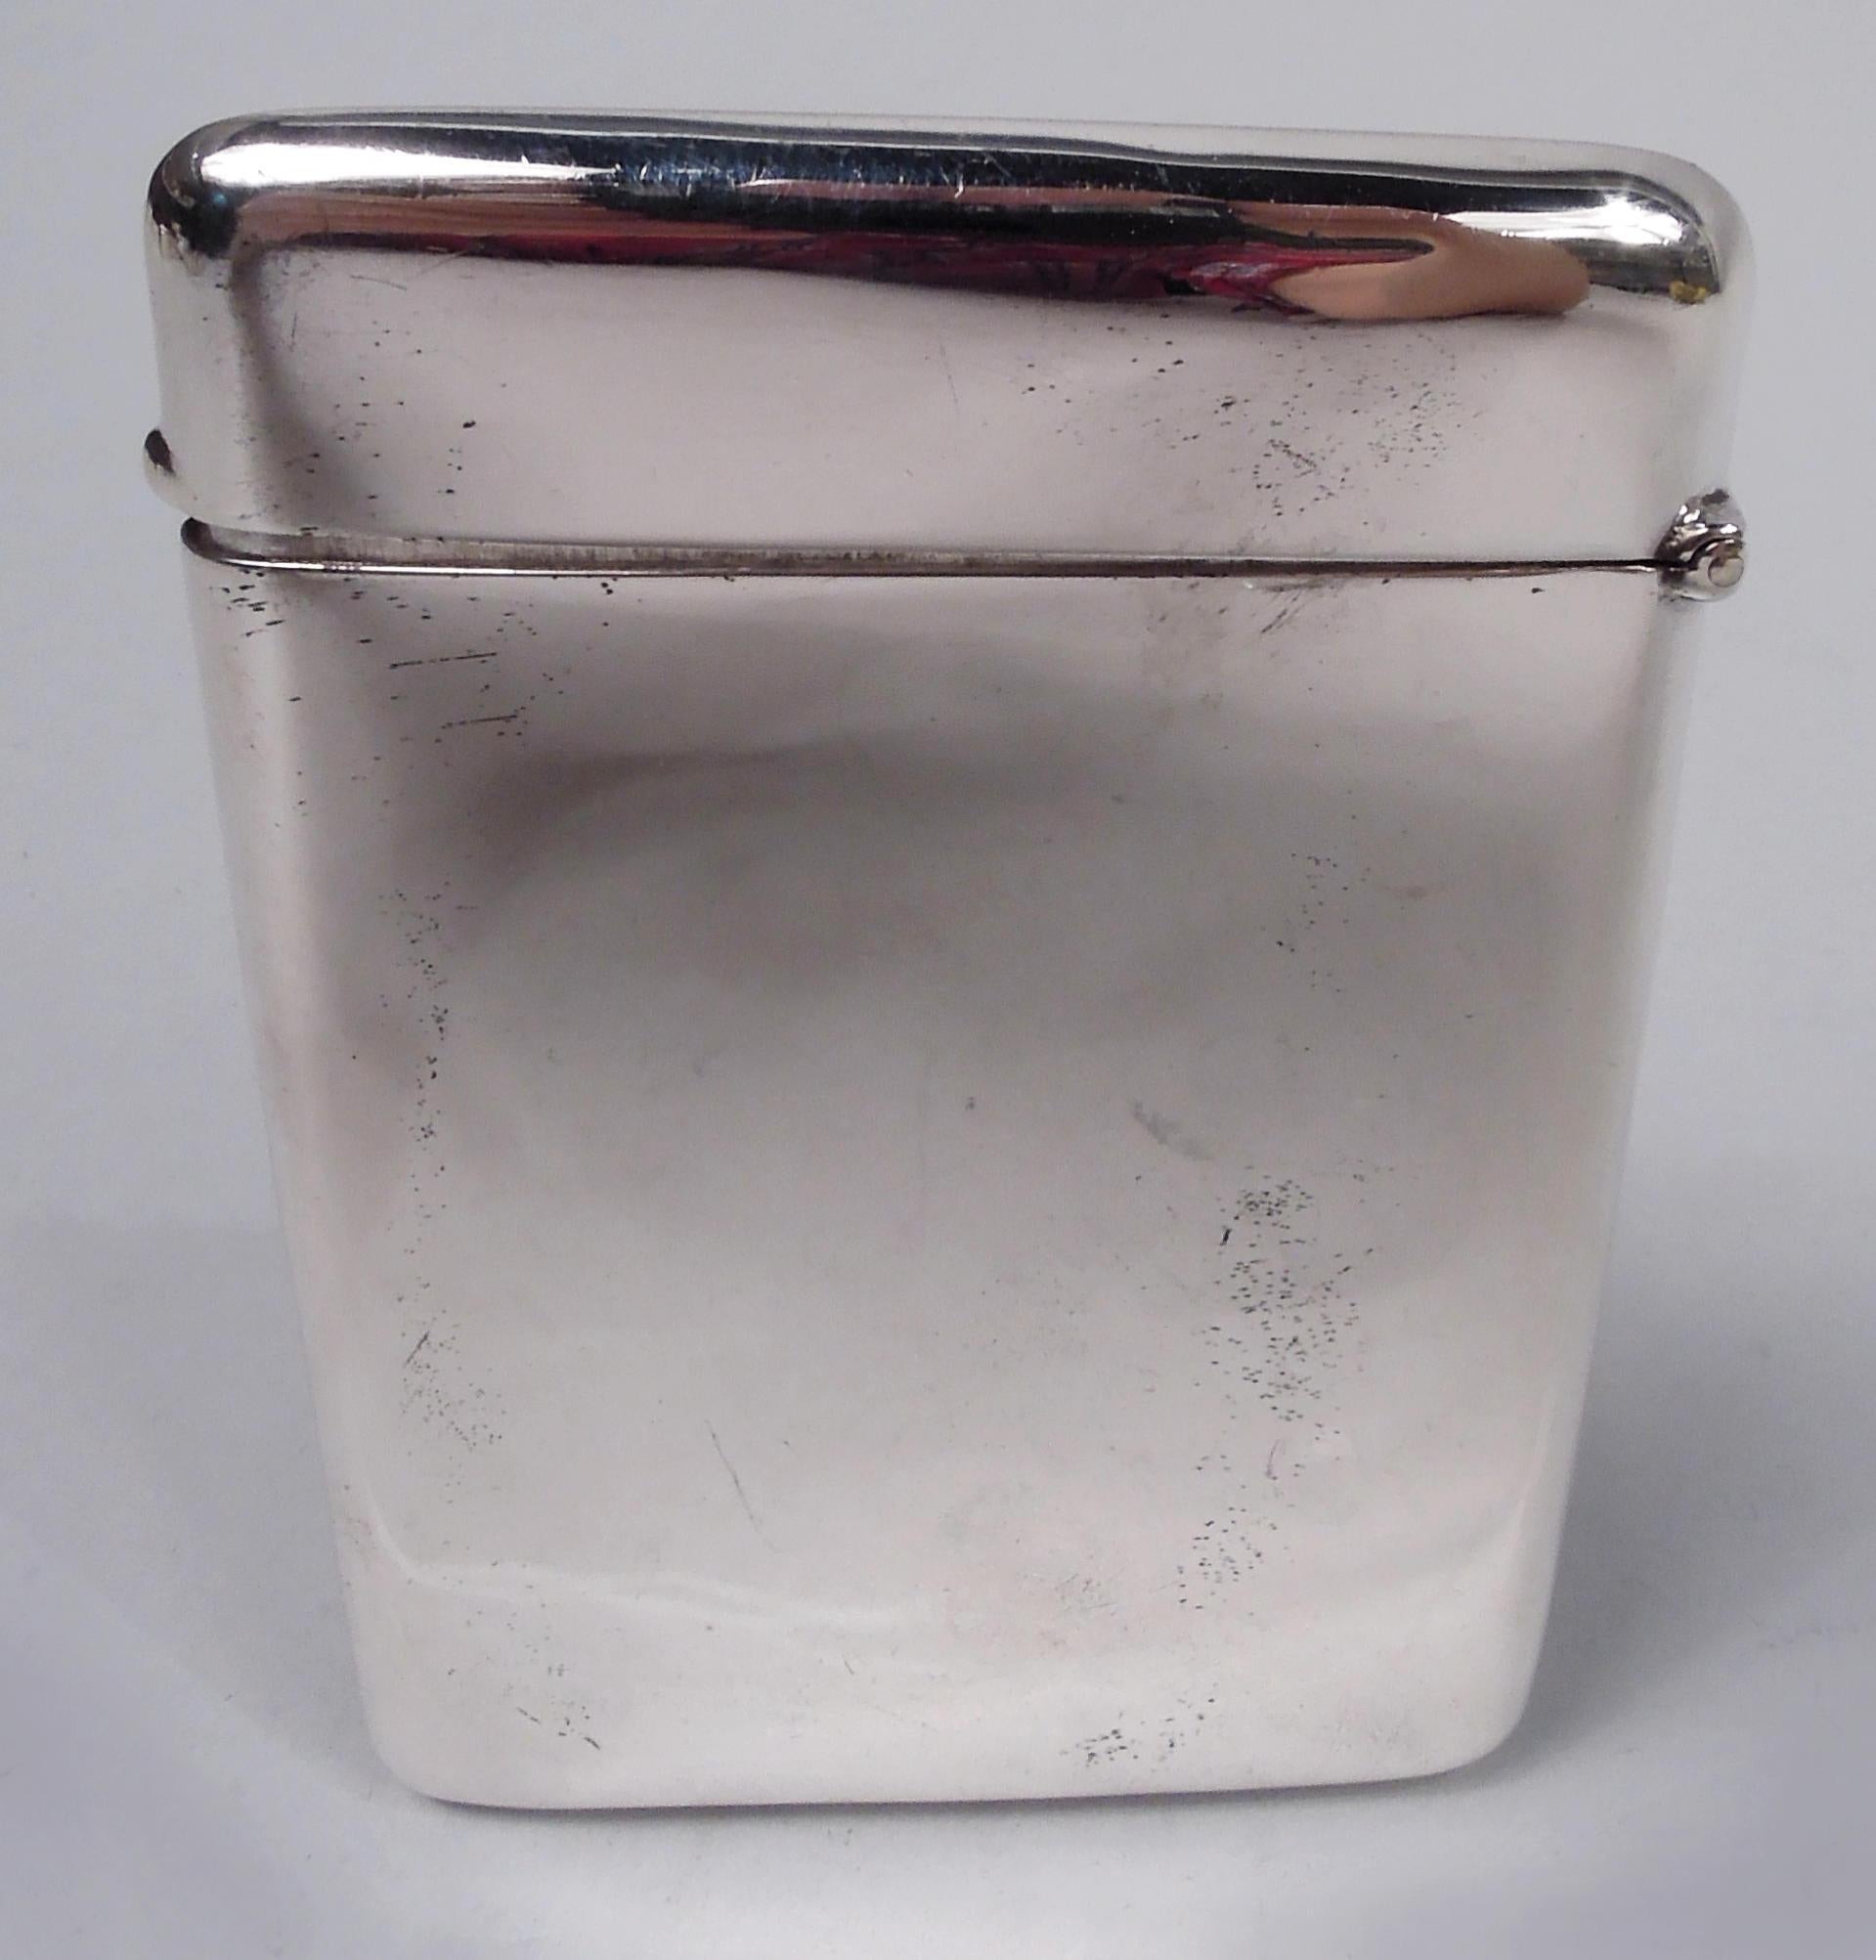 Edwardian Art Nouveau sterling silver card case. Made by Clark & Sewell in Birmingham in 1906. Rectangular with hinged cover and plain back. On front is one maiden with faraway look, one iris flower, two water lilies, and the sun in the act of